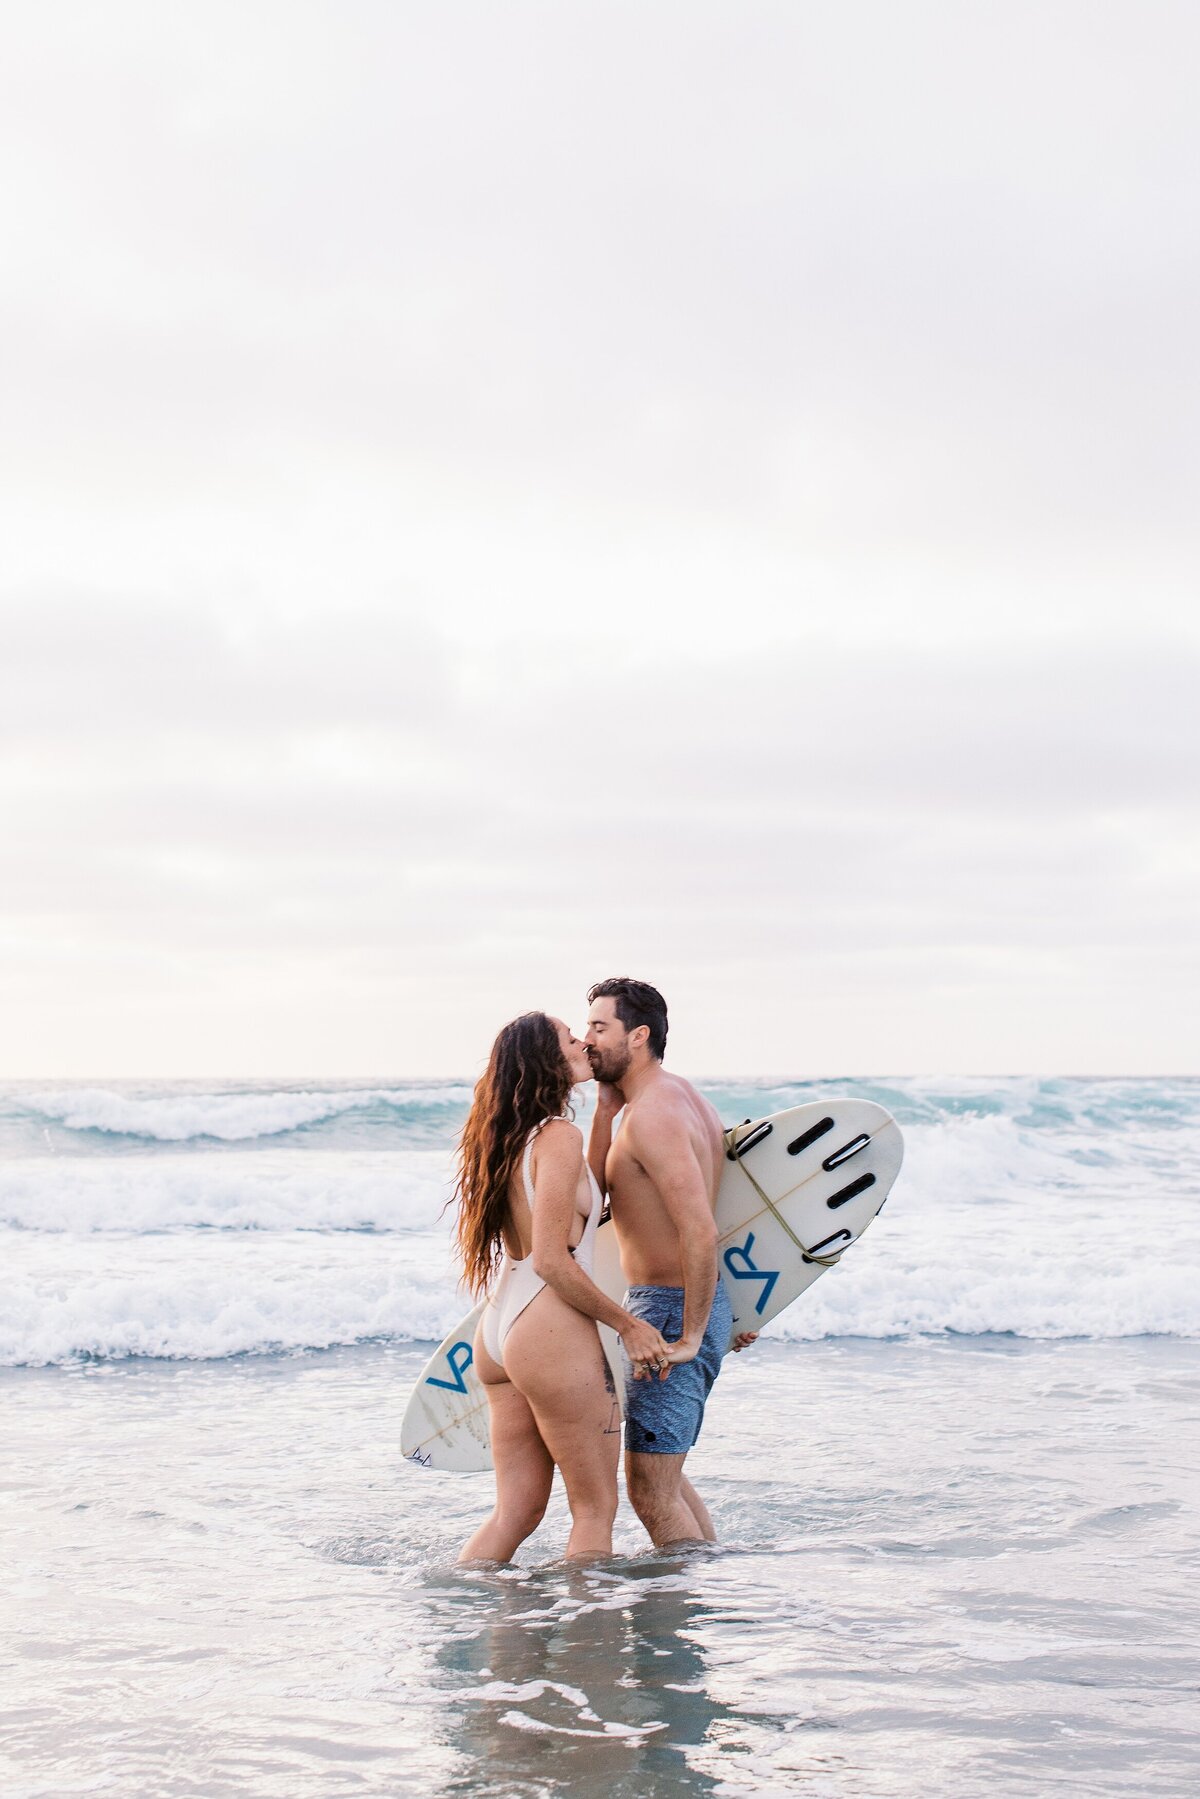 20200304 California Love_Styled Lifestyle Surfer Beach Engagement Session_San Diego_Bethany Picone Photography-101